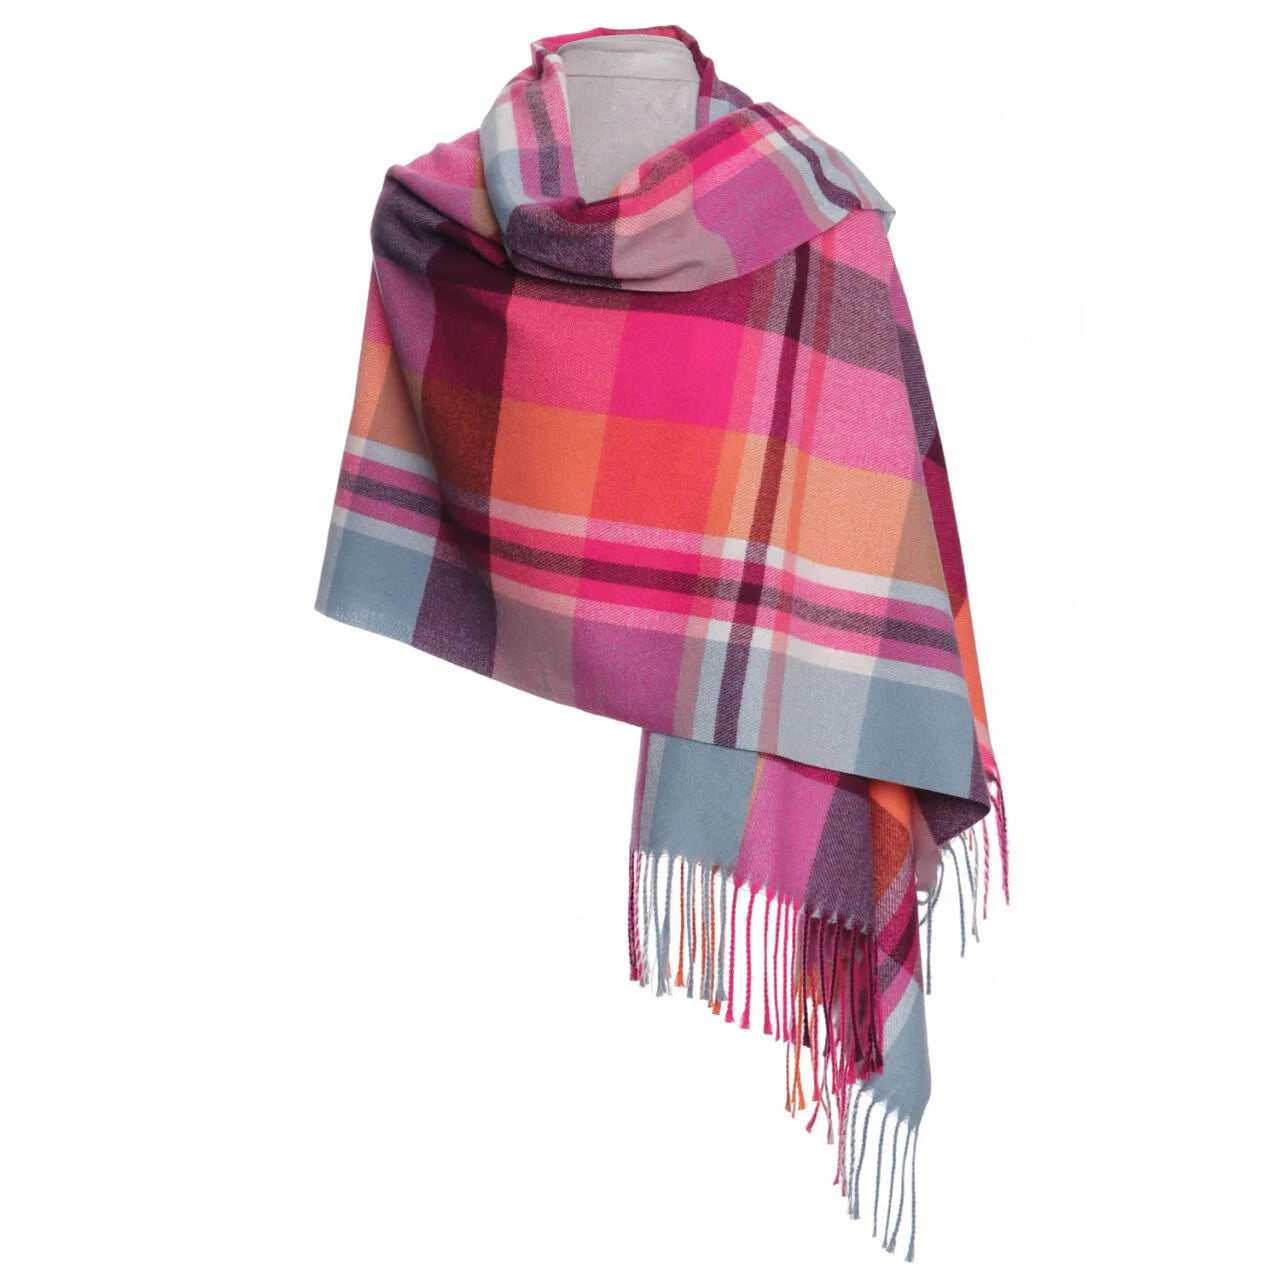 Fab Gifts | Winter Accessories Winter Scarf Winter Scarf Hot Pink Check Fringe by Weirs of Baggot Street